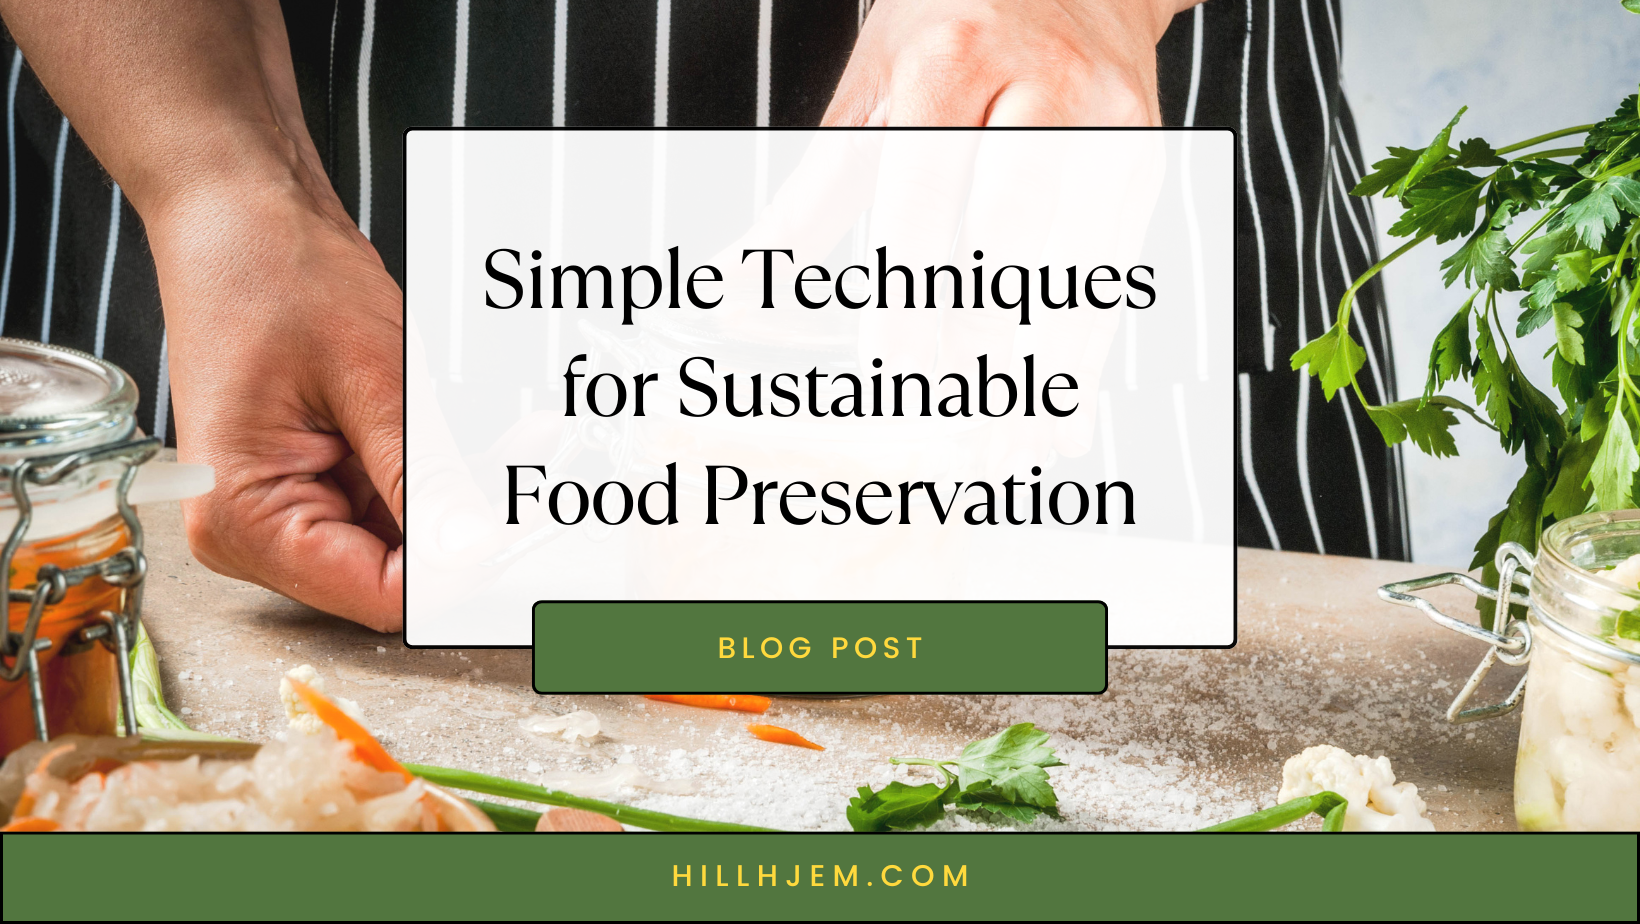 Simple Techniques for Sustainable Food Preservation